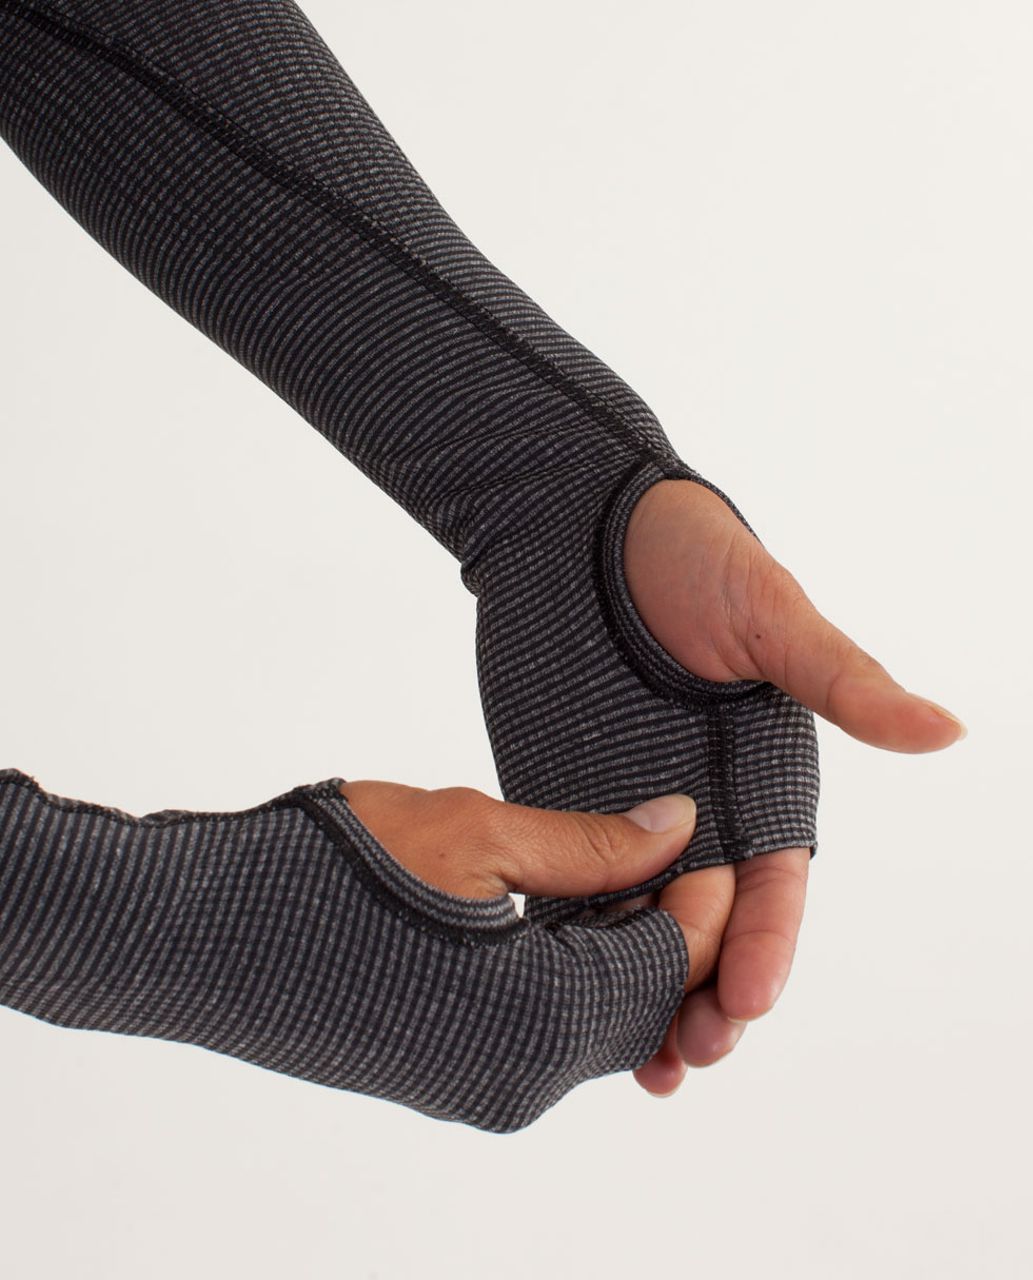 Lululemon Swiftly Arm Warmers (First Release) - Black